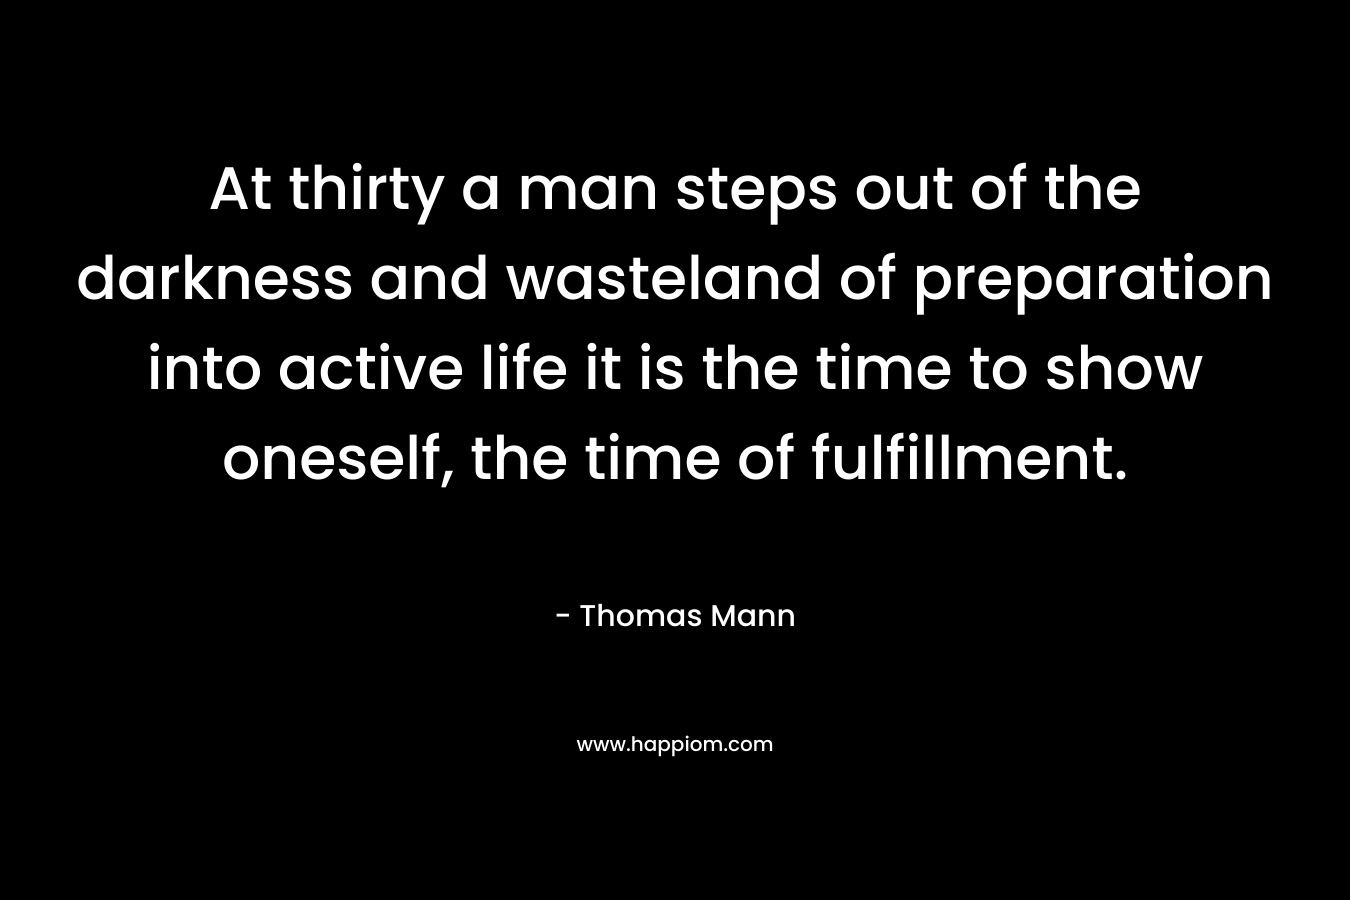 At thirty a man steps out of the darkness and wasteland of preparation into active life it is the time to show oneself, the time of fulfillment. – Thomas Mann